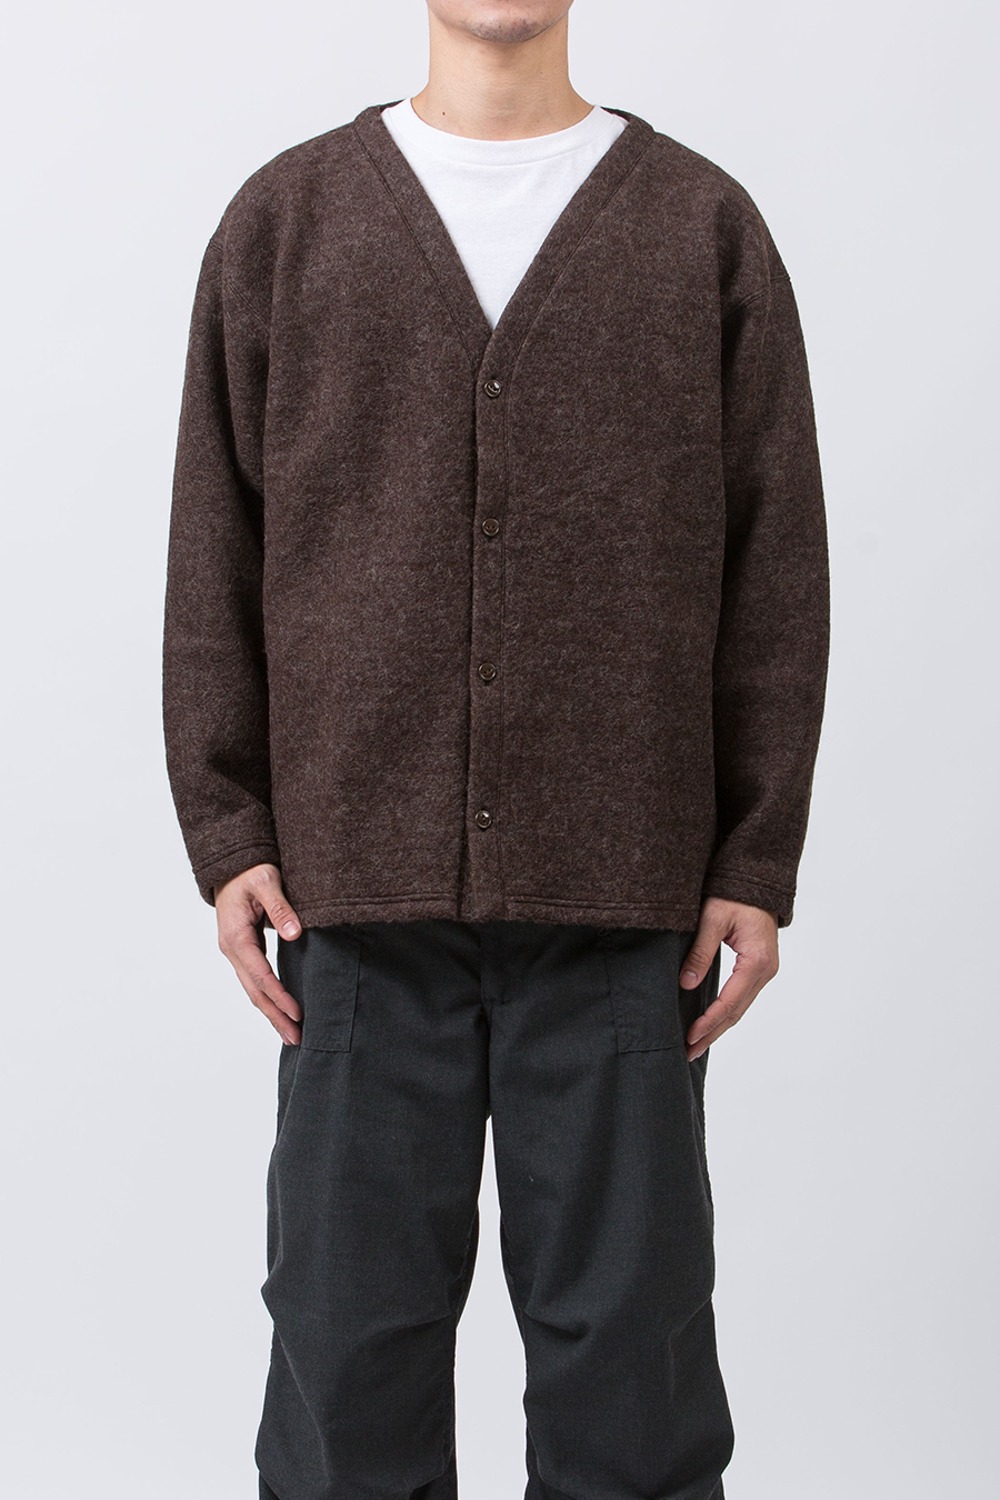 (23FW) SOUTH2 WEST8 S.S. V NECK CARDIGAN - W/PE BOILED JERSEY B-BROWN